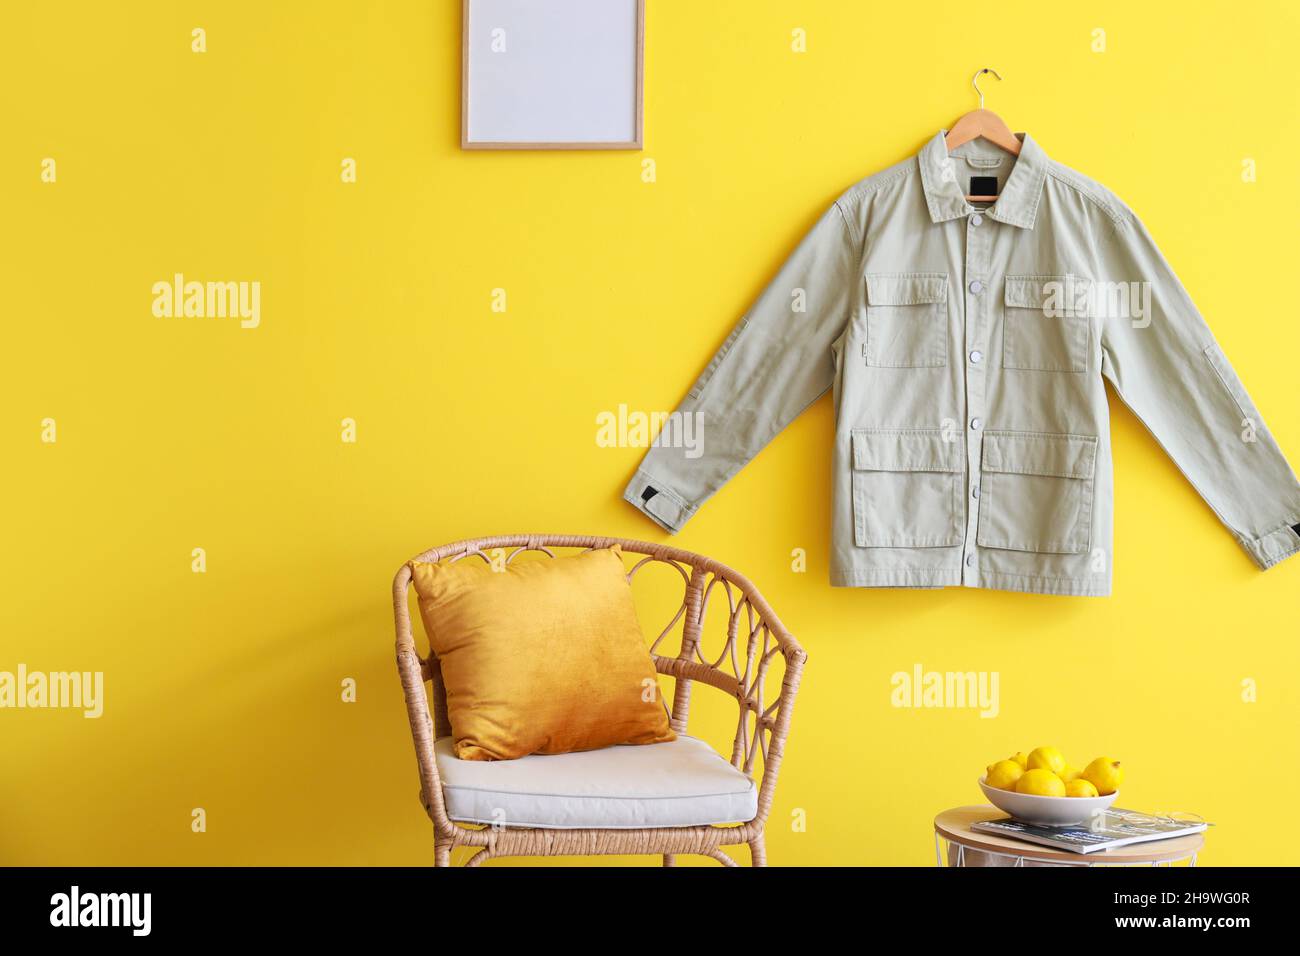 Comfortable chair and stylish jacket hanging on color wall in room Stock Photo